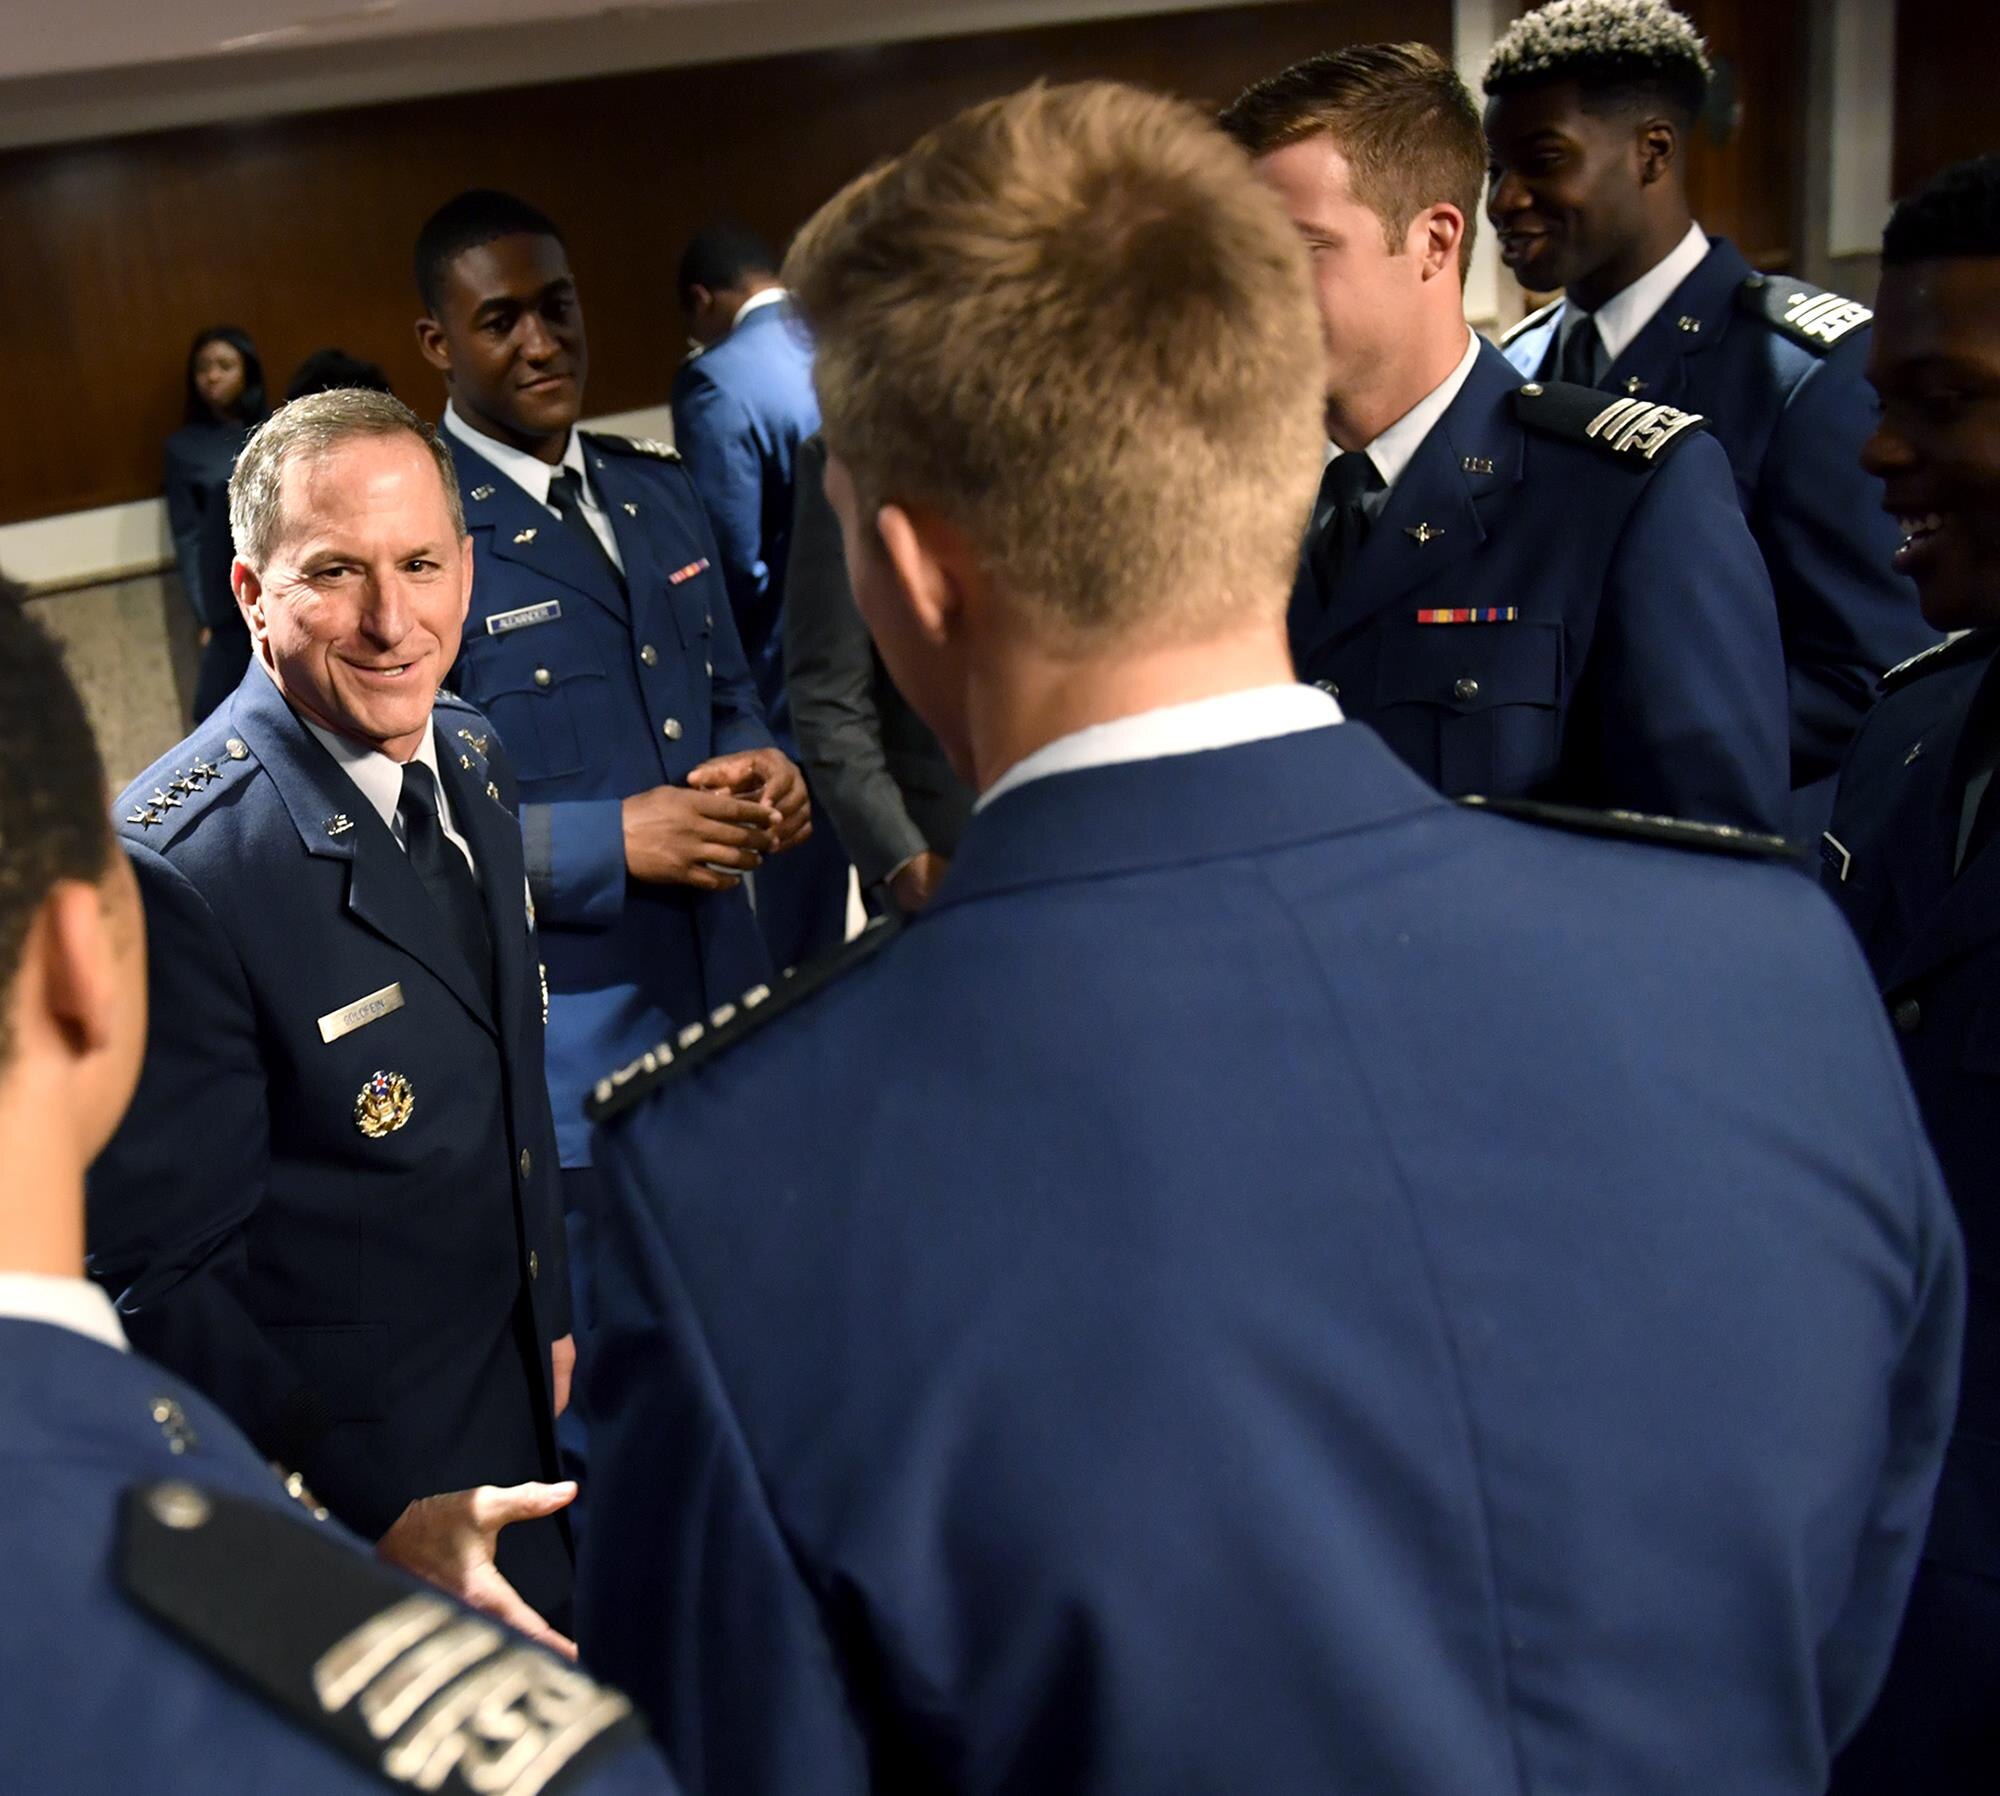 Air Force Chief of Staff Gen. David L. Goldfein talks with members of the U.S. Air Force Academy football team during the Commander in Chief’s Trophy Congressional social at the Dirkson Senate Office Building in Washington, D.C., May 1, 2017. (U.S. Air Force photo/Wayne A. Clark)